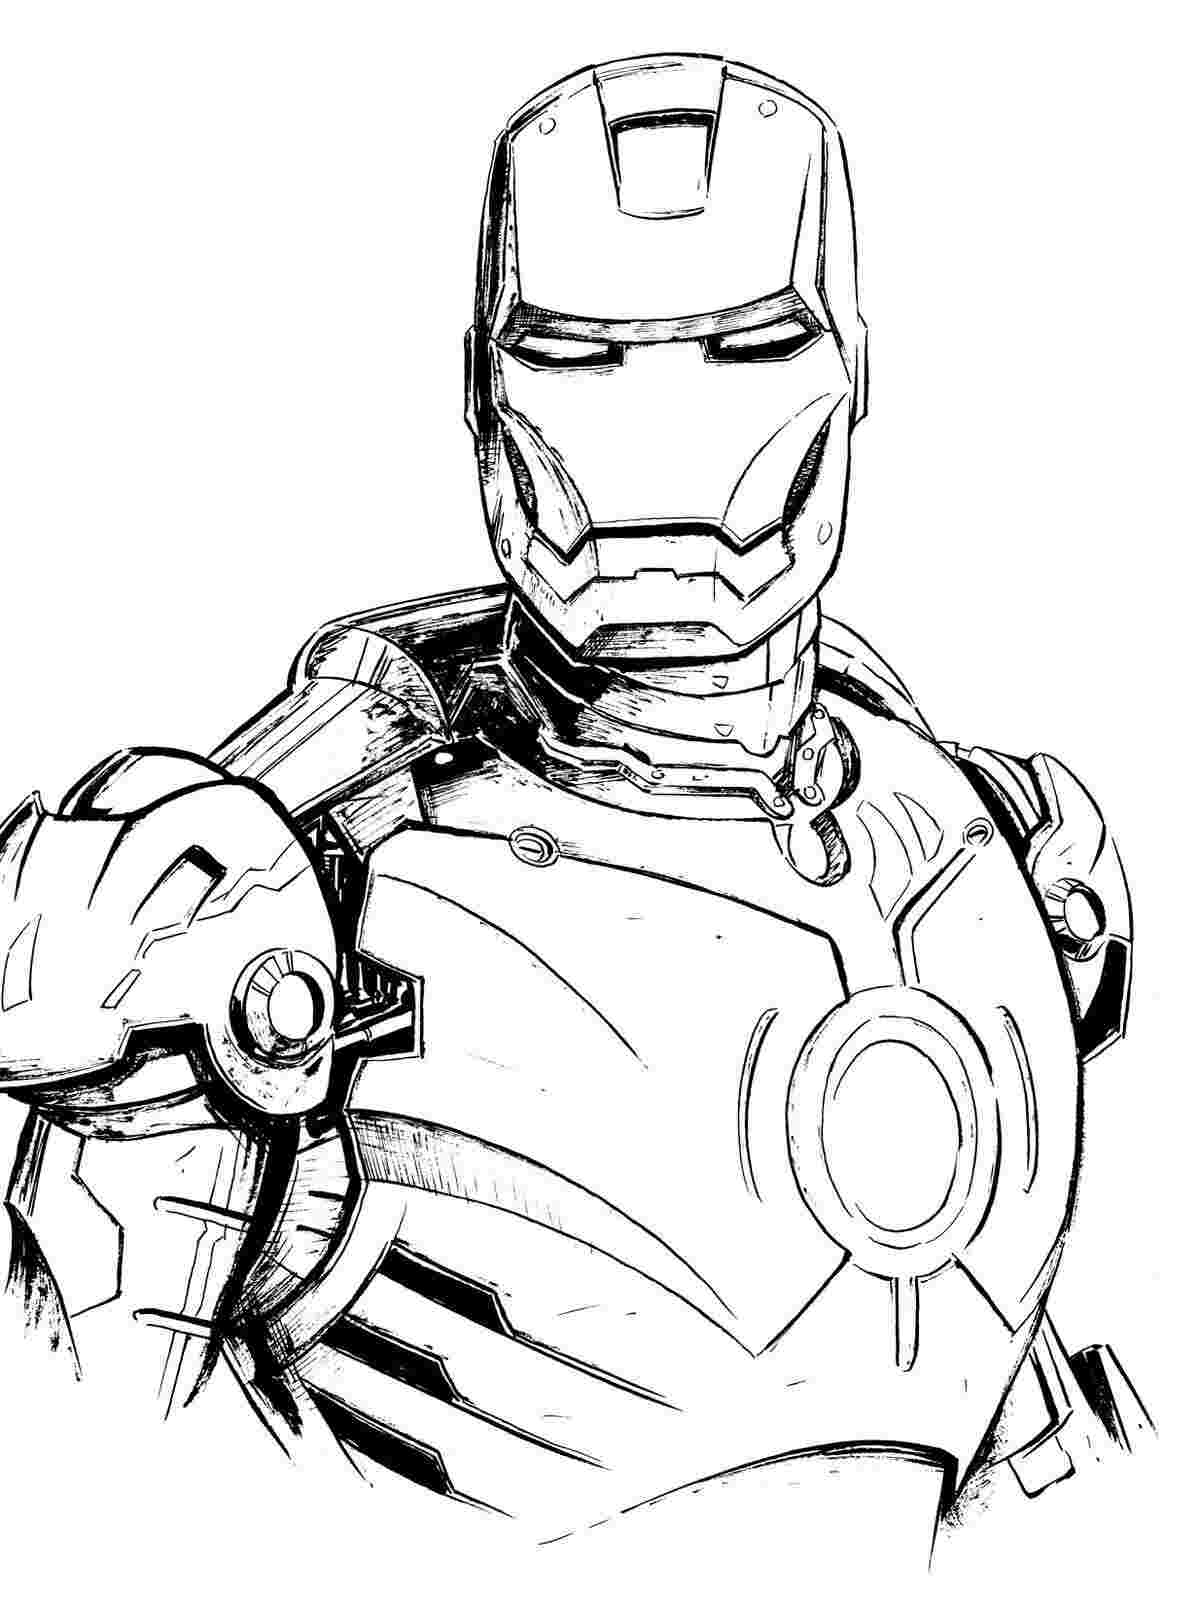 Horrible Iron Man Armor Has A Powerful Circle On Its Chest Coloring Pages